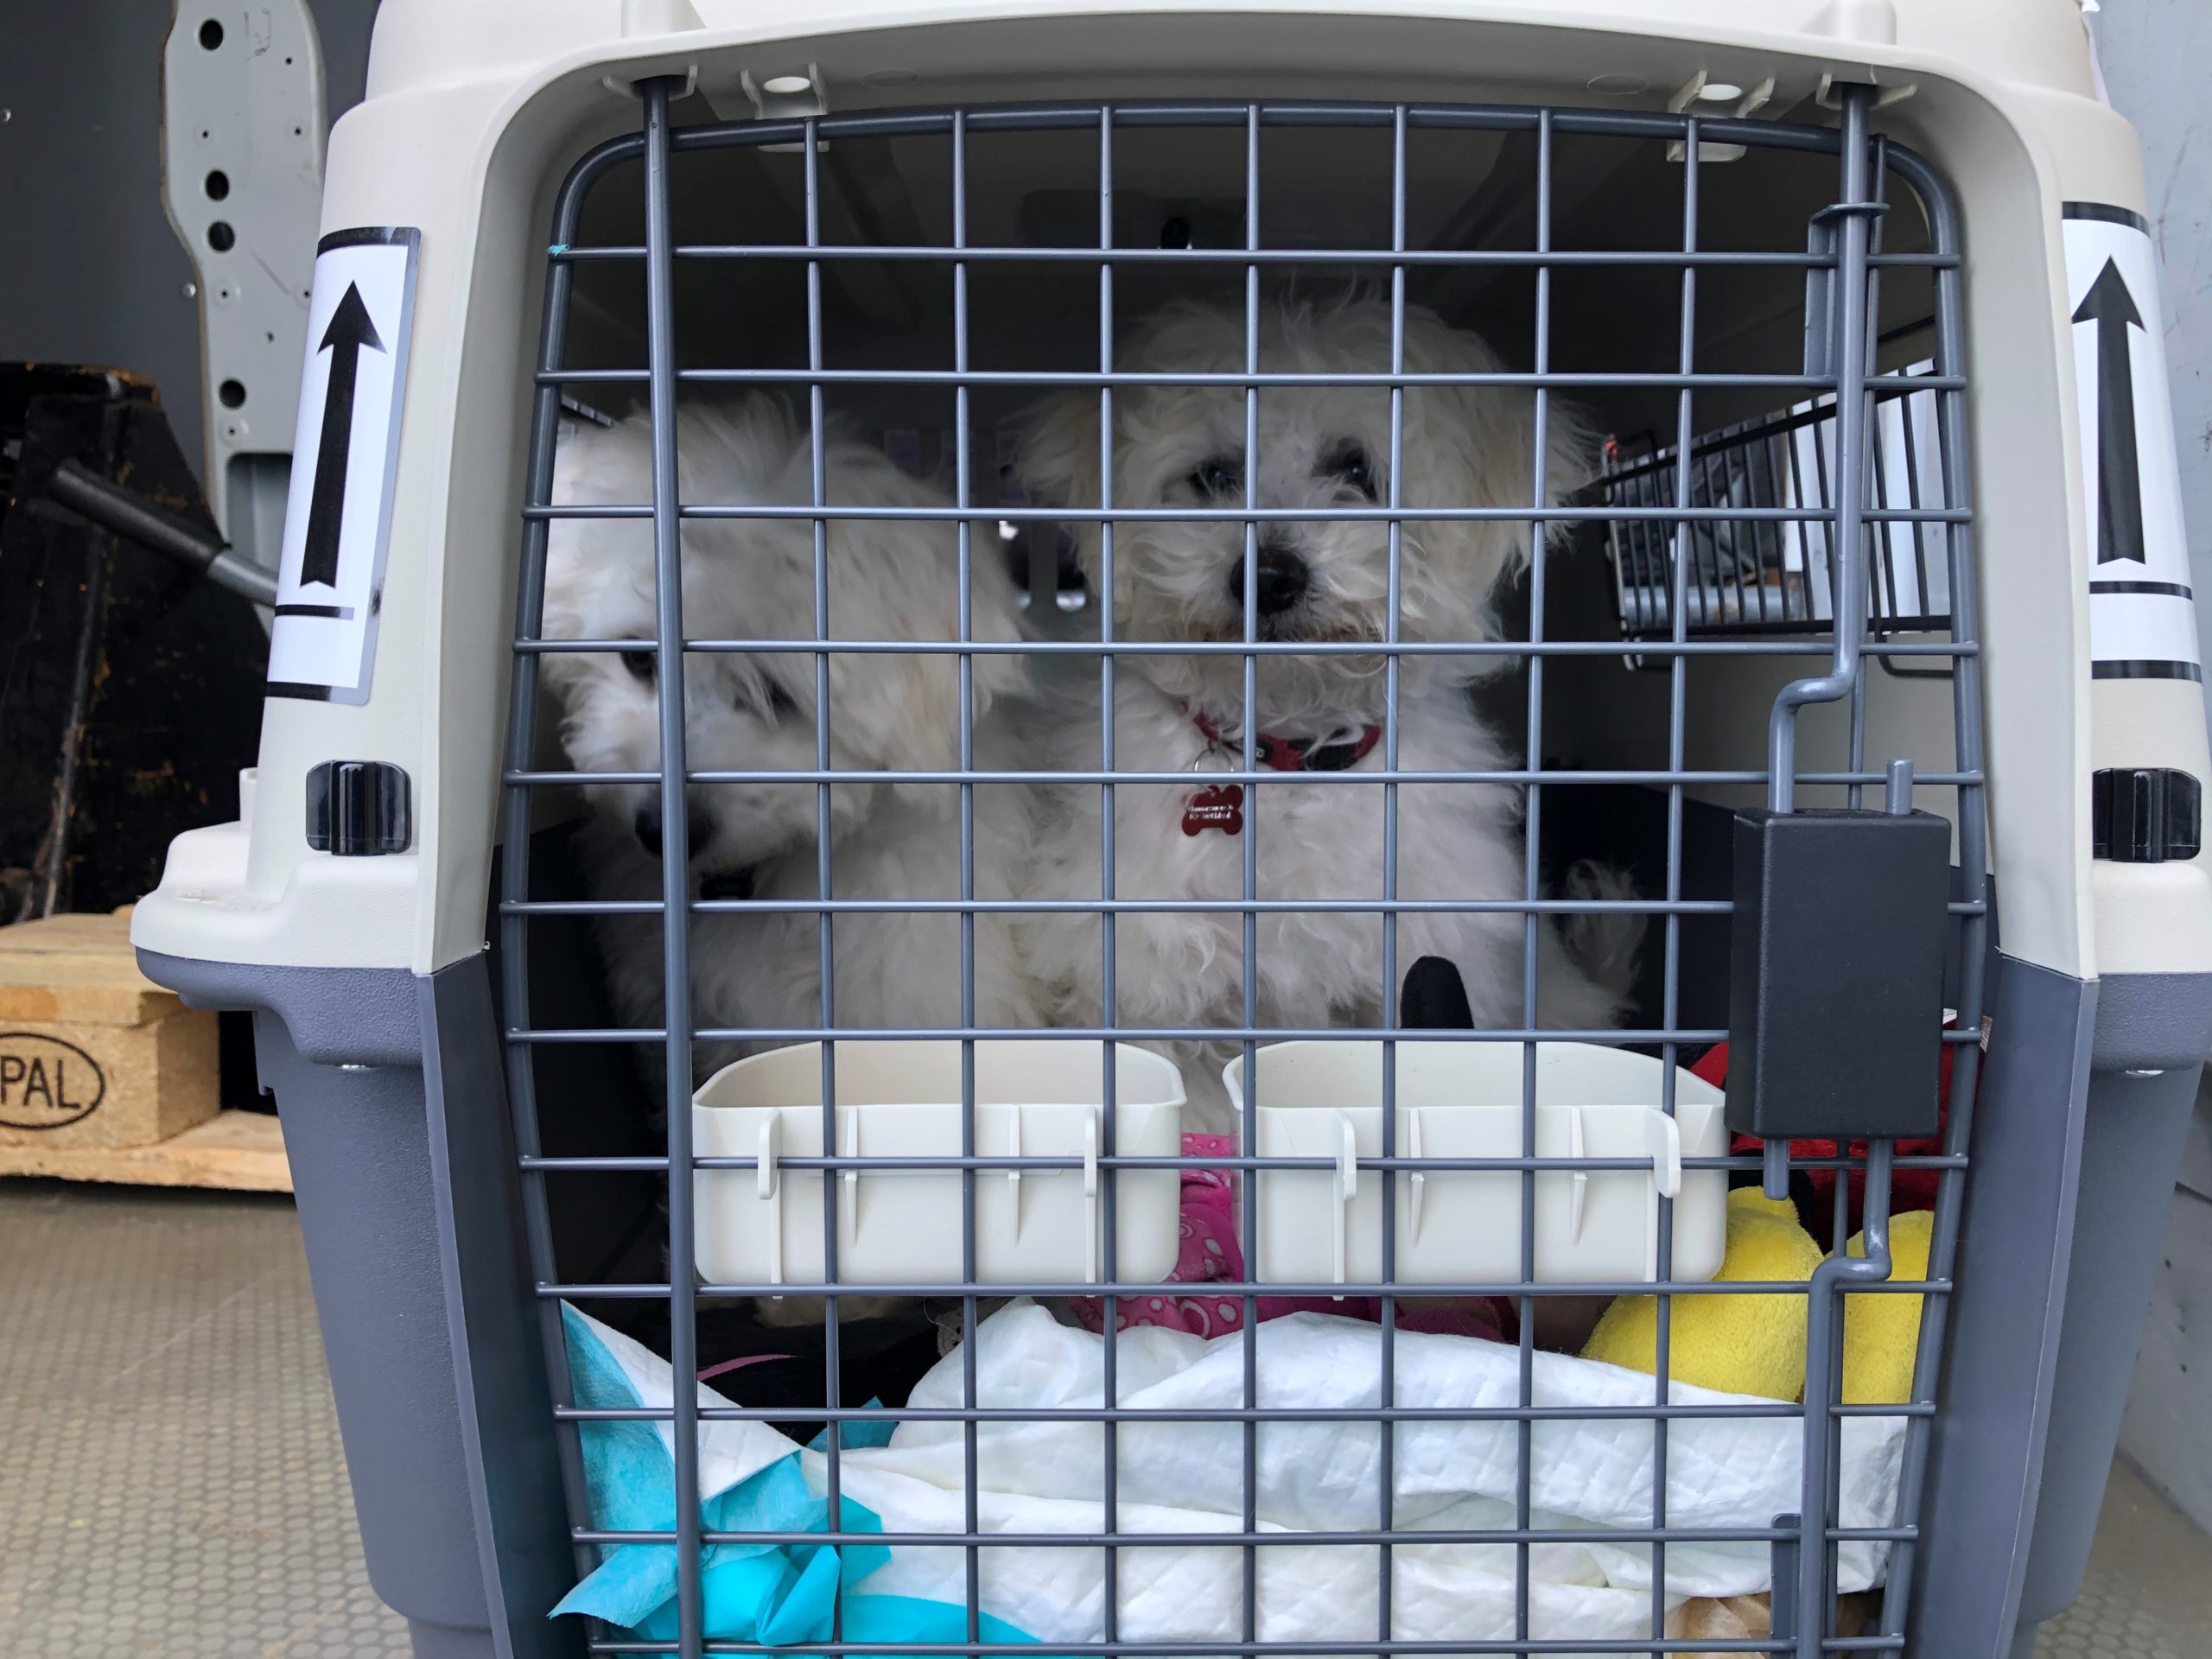 pet and animal transportation tips Archives - Conqueror News